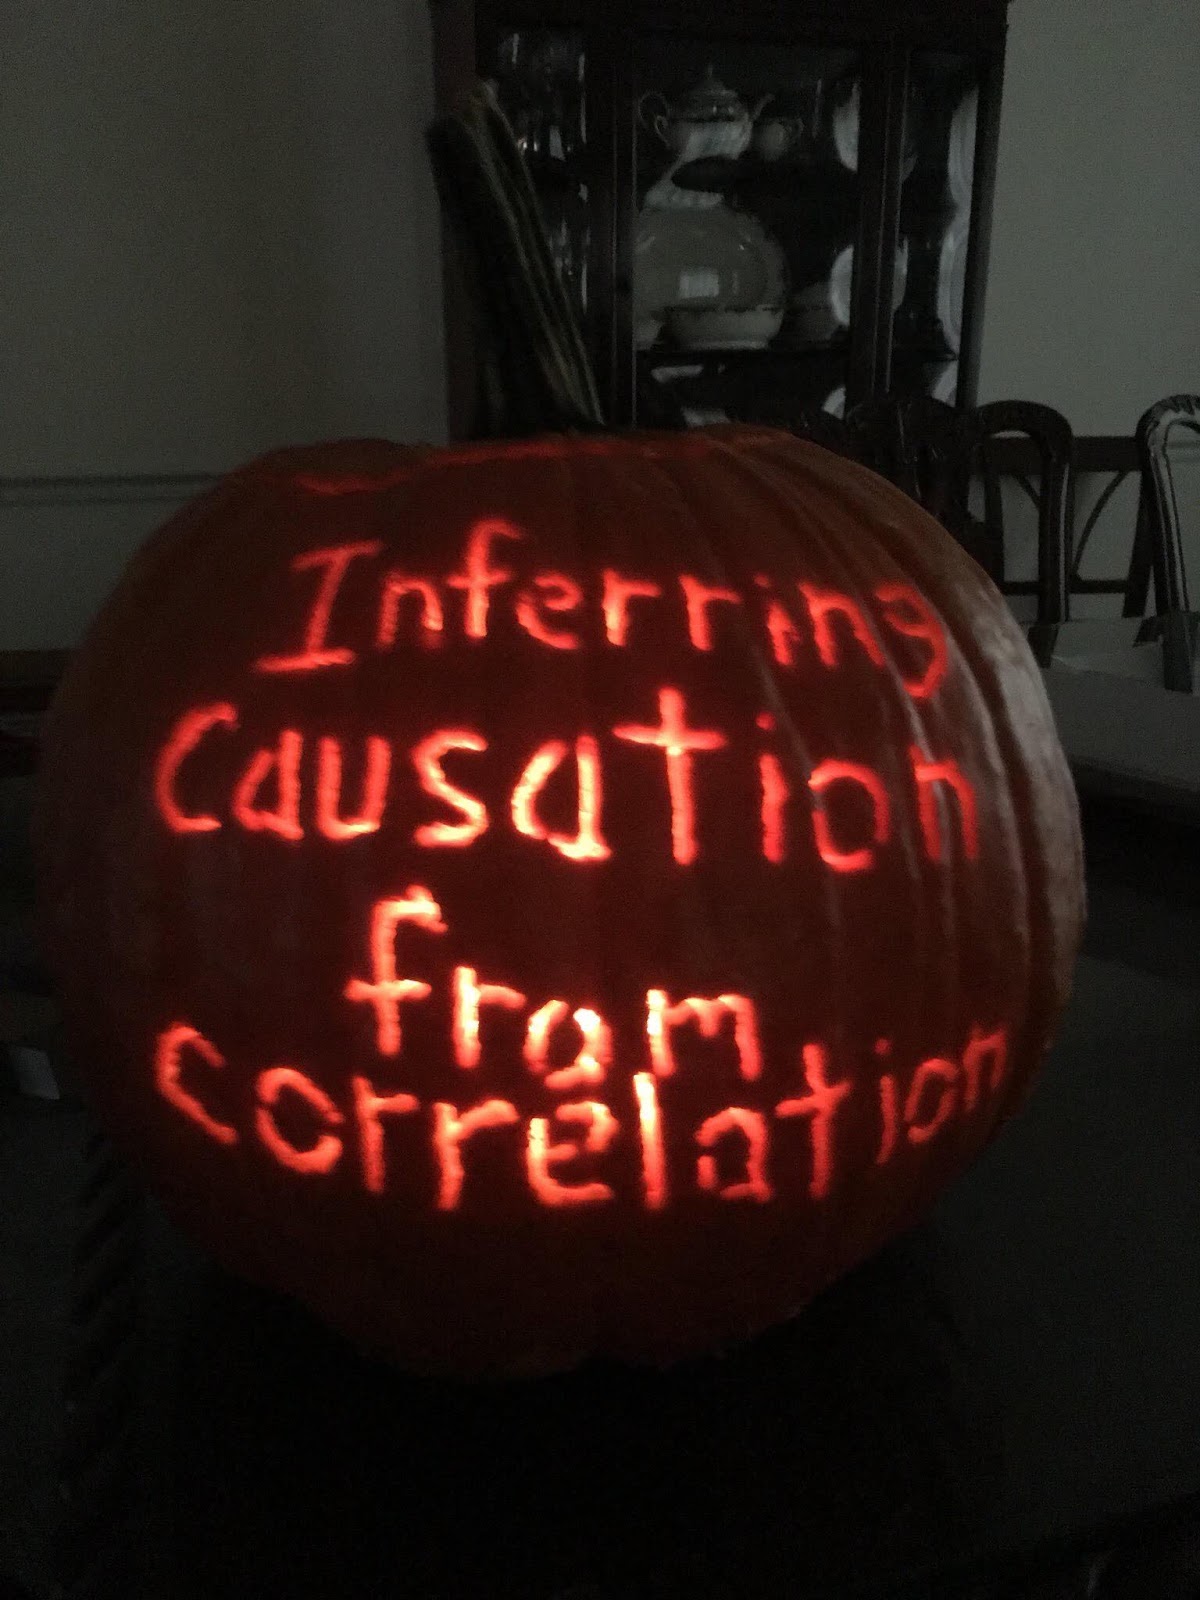 Inferring Causation from Correlation